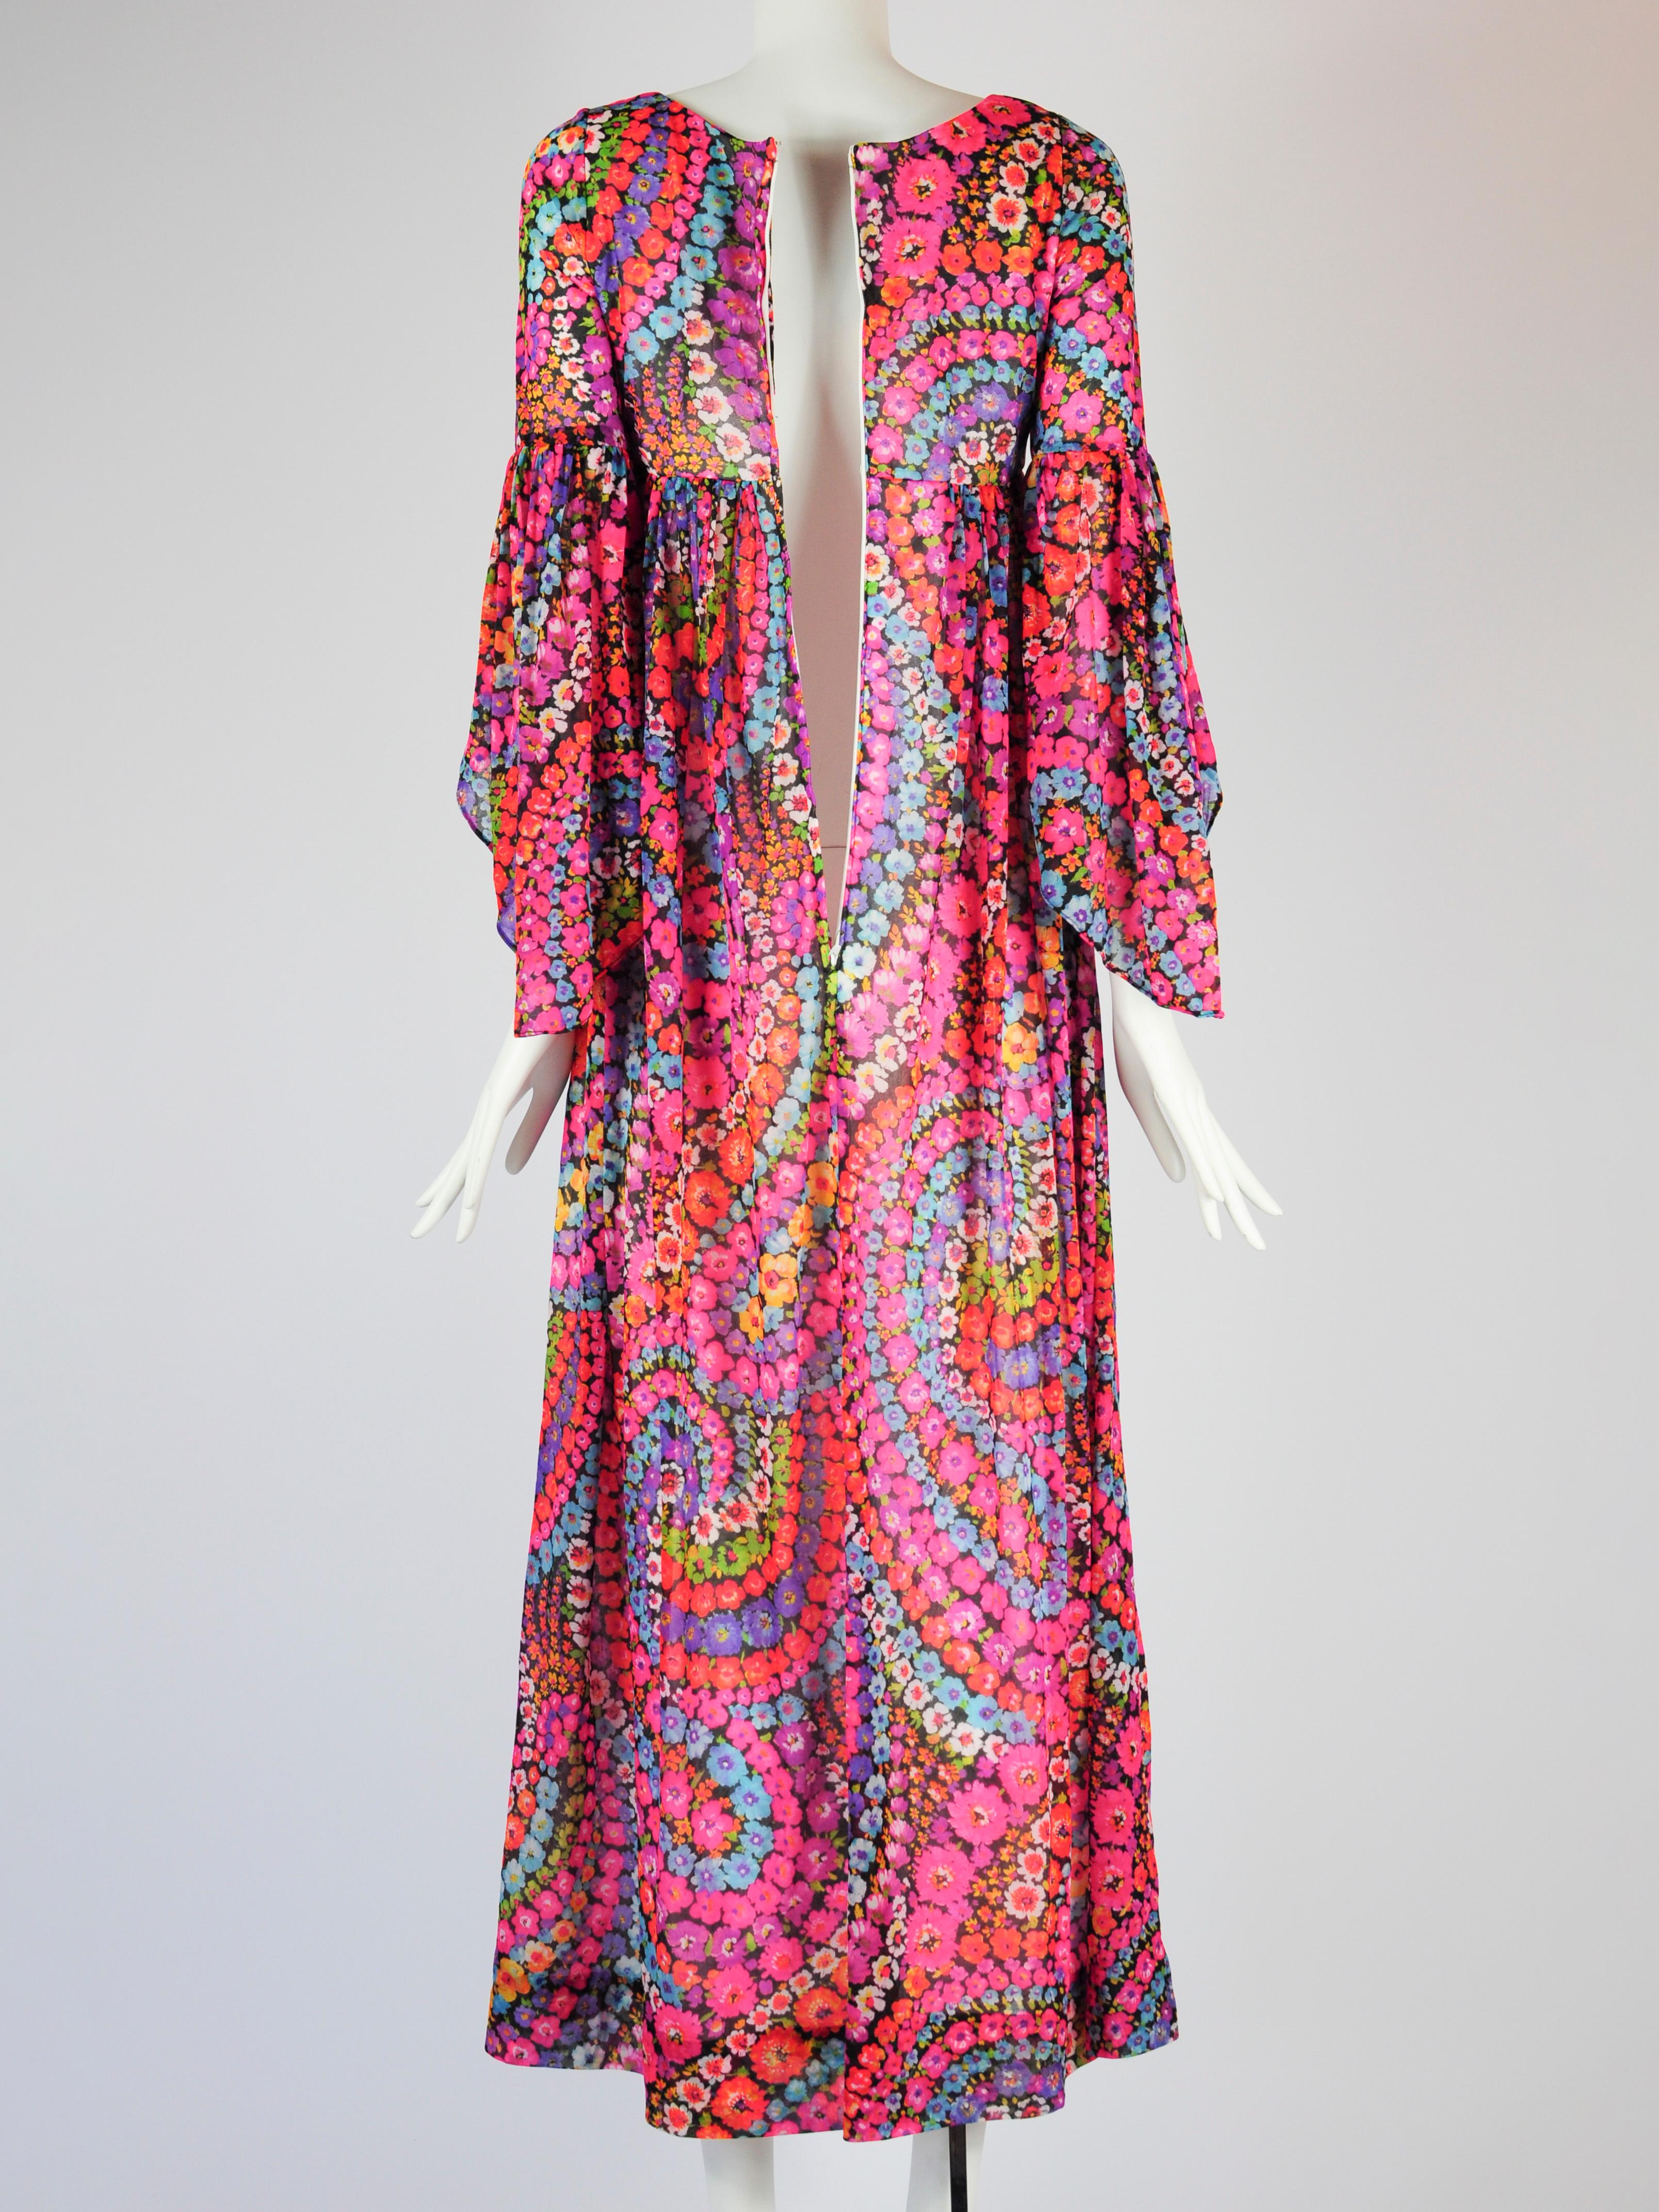 Psychedelic Flower Goddess Dress Empire Waist Butterfly Sleeve Quad London 1970s For Sale 5